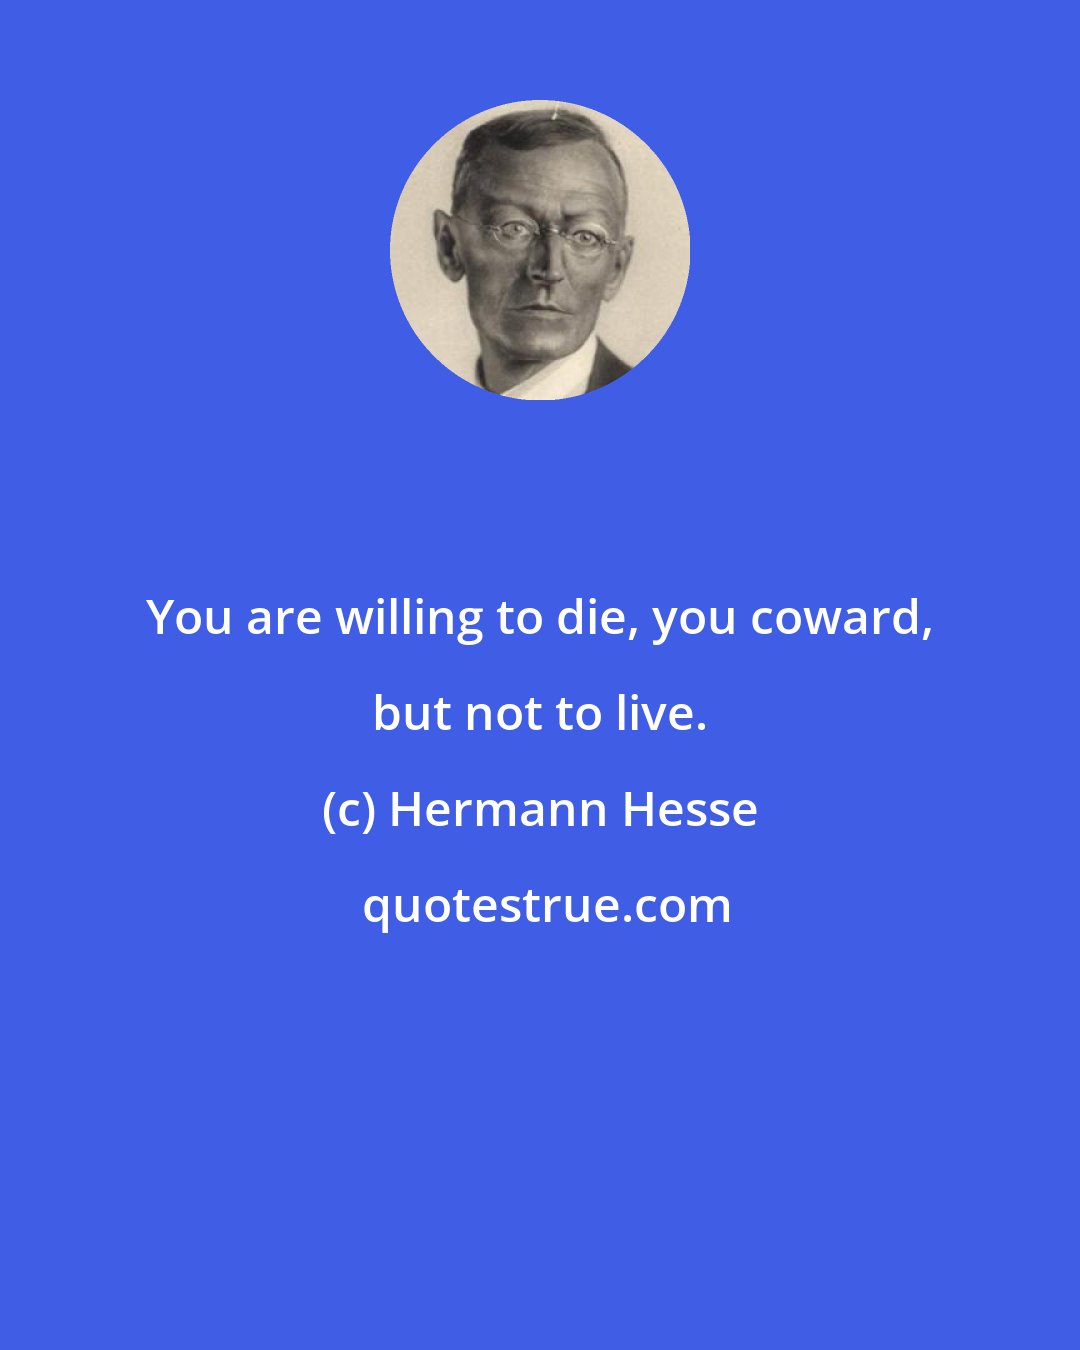 Hermann Hesse: You are willing to die, you coward, but not to live.